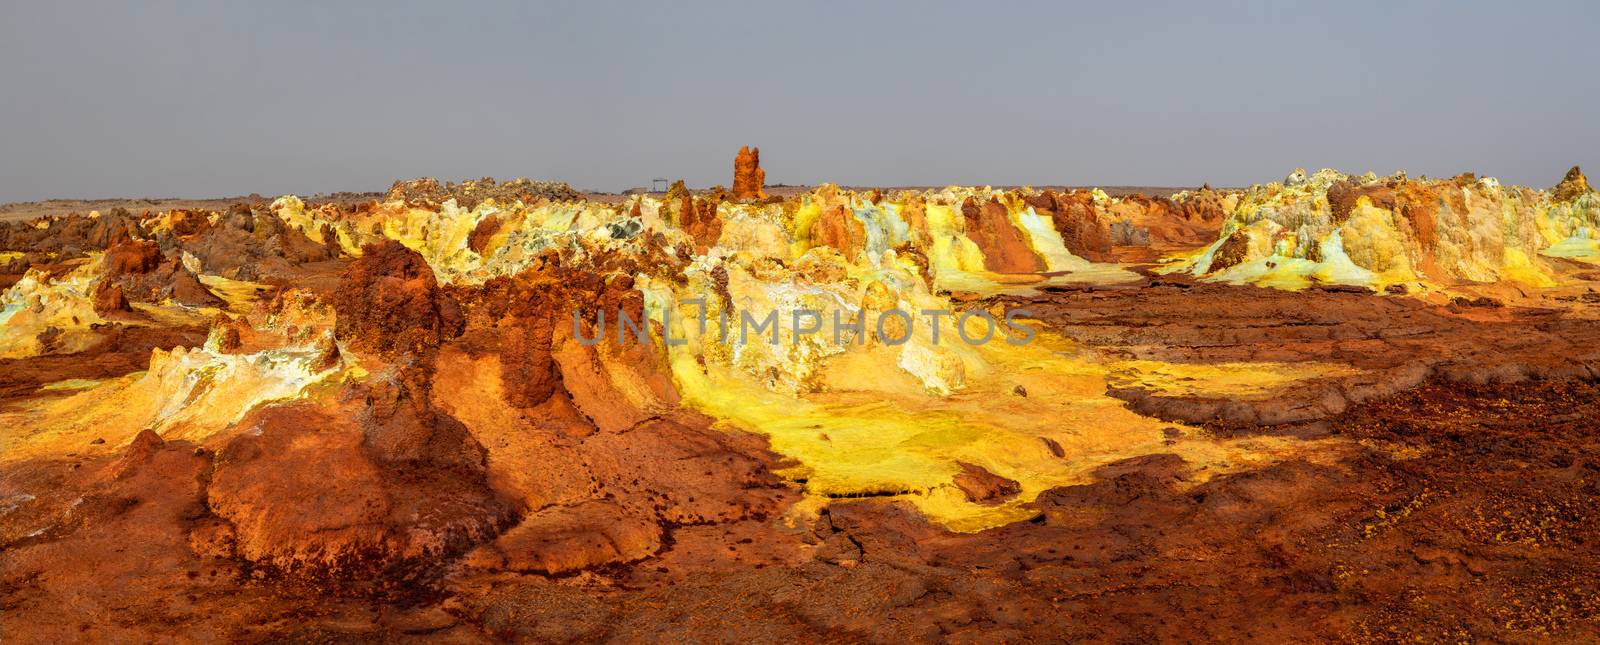 Beautiful small sulfur lakes Dallol, Ethiopia. Danakil Depression is the hottest place on Earth in terms of year-round average temperatures. It is also one of the lowest places on the planet